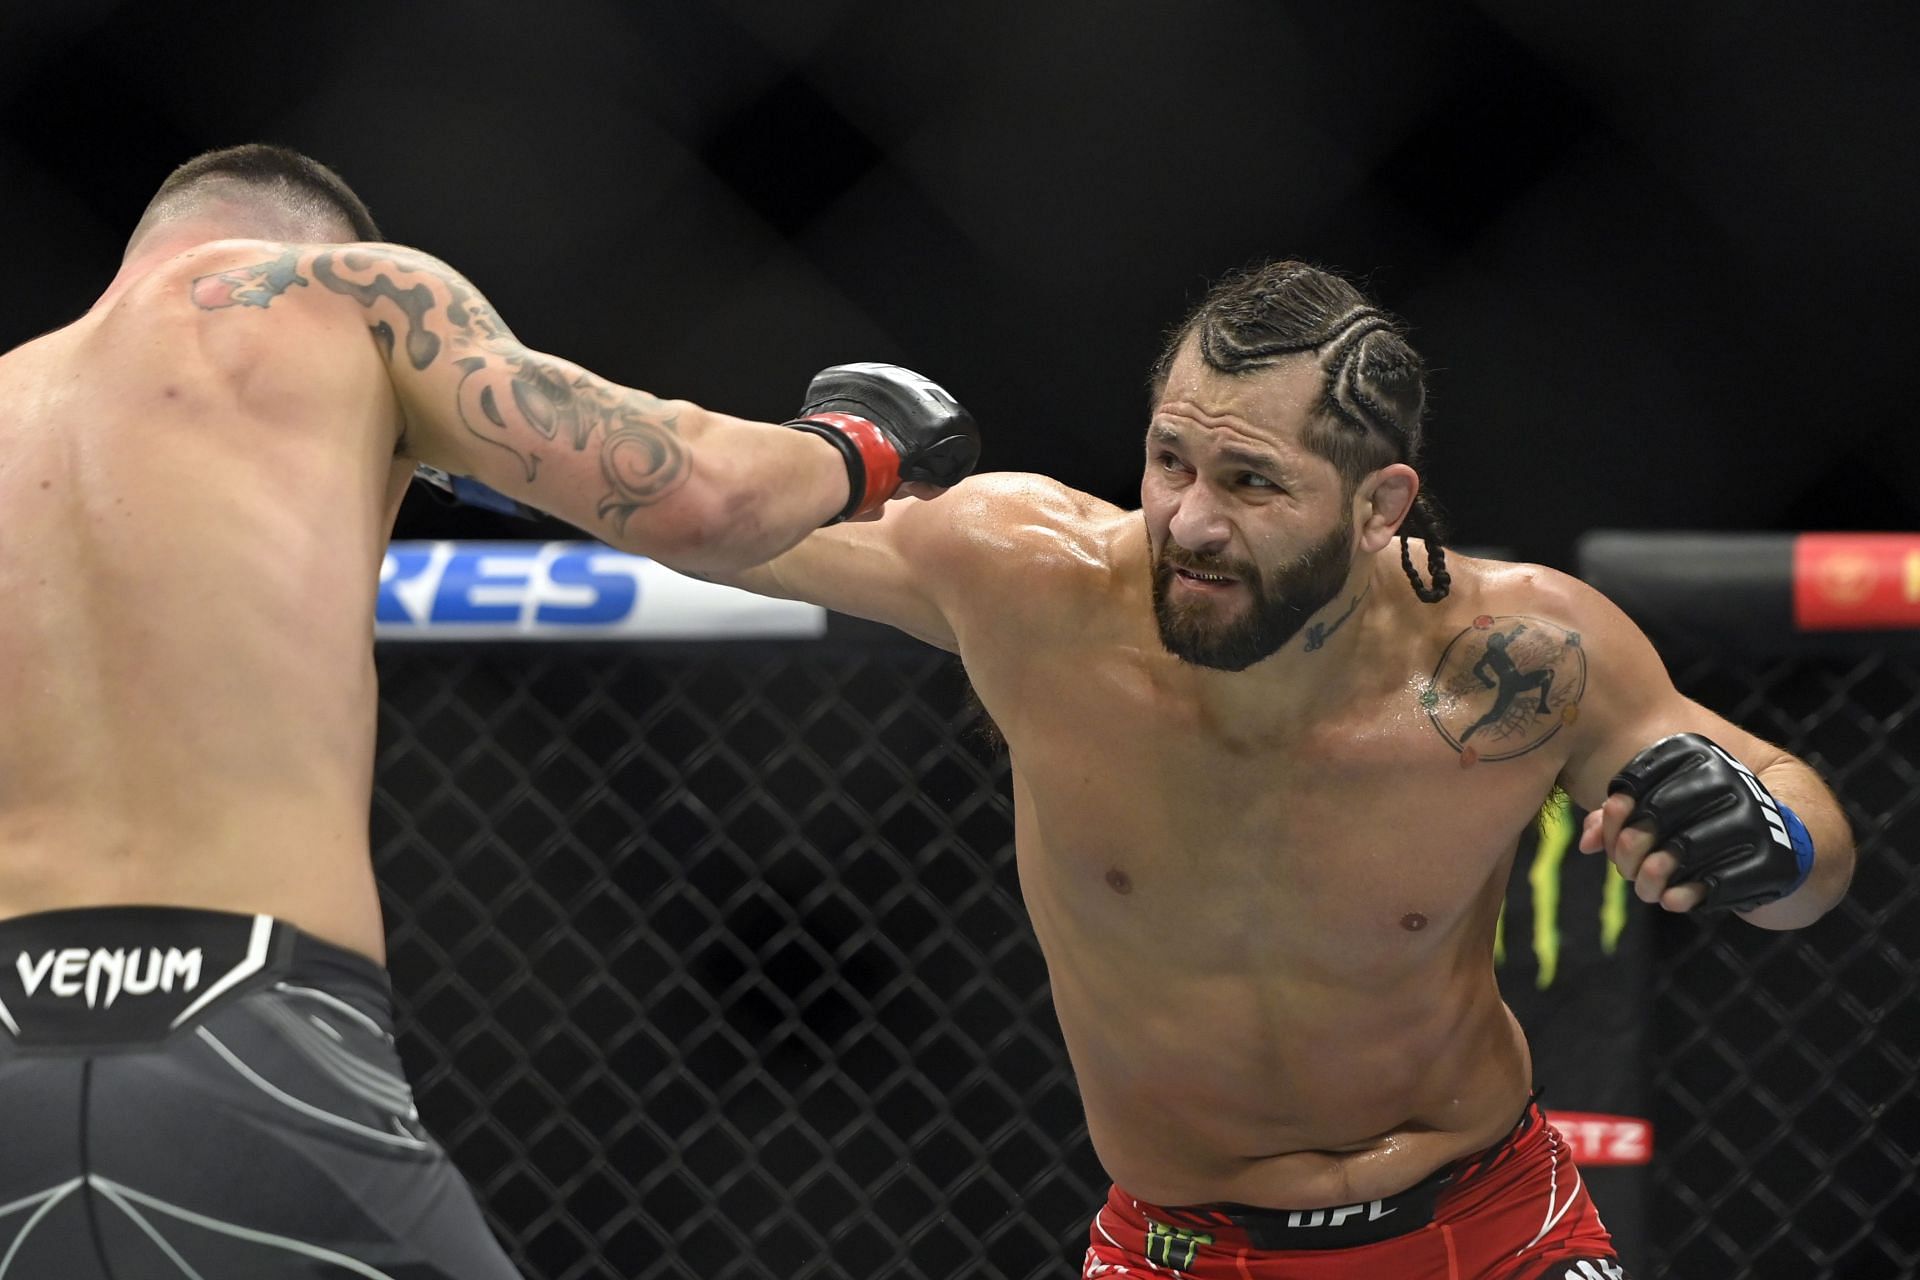 Jorge Masvidal demanded his release in 2020 in order to squeeze more pay from his employers